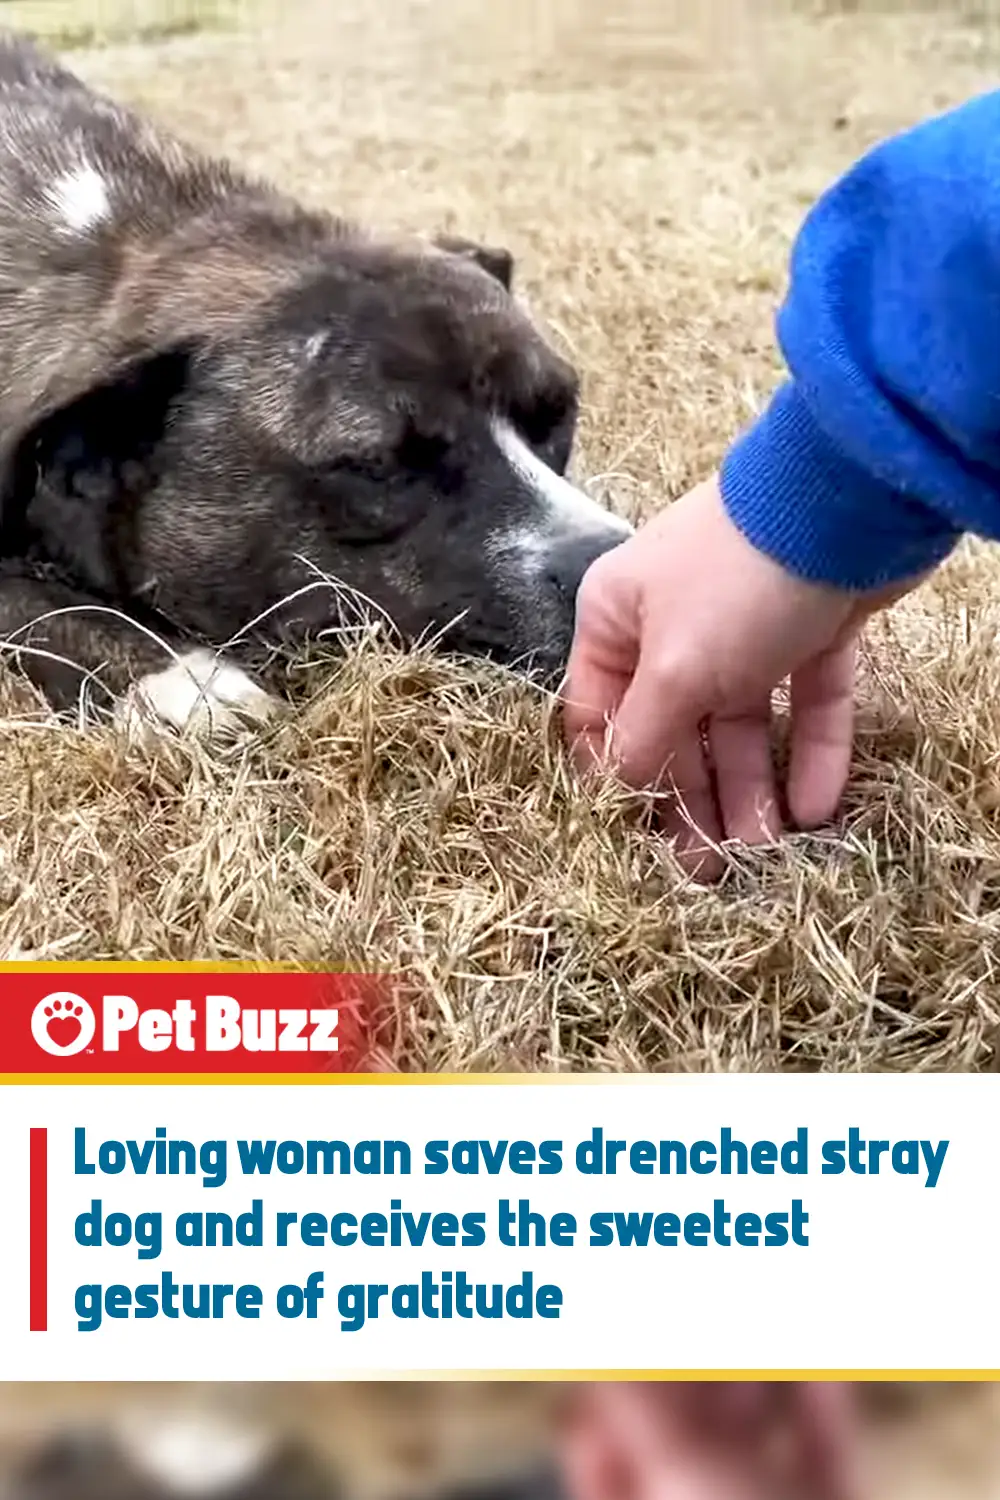 Loving woman saves drenched stray dog and receives the sweetest gesture of gratitude